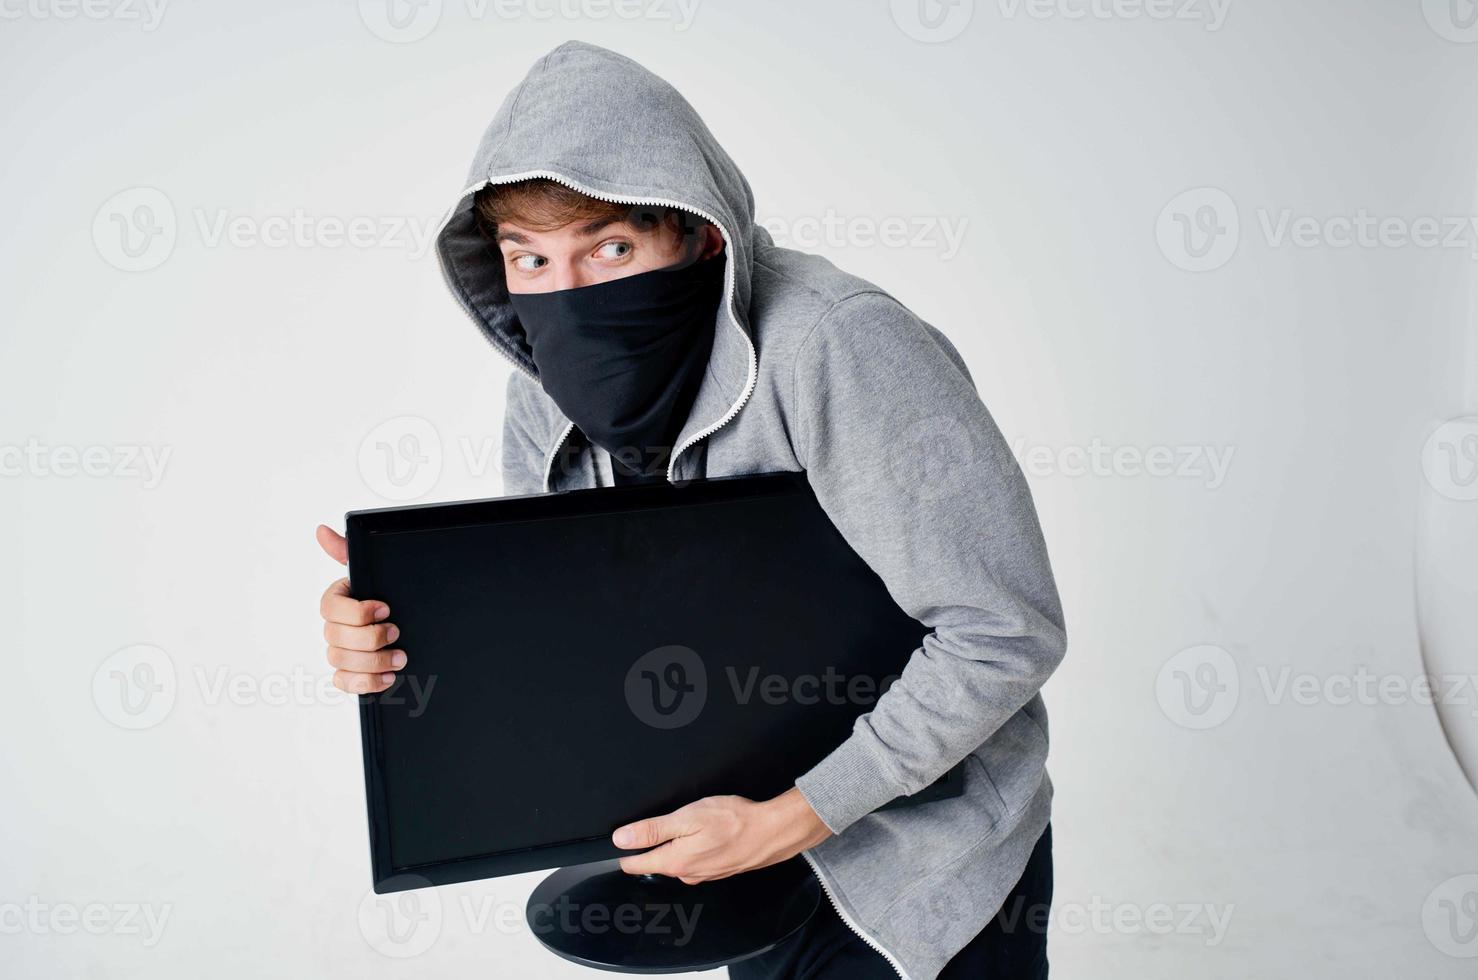 male thief hooded head hacking technology security isolated background photo